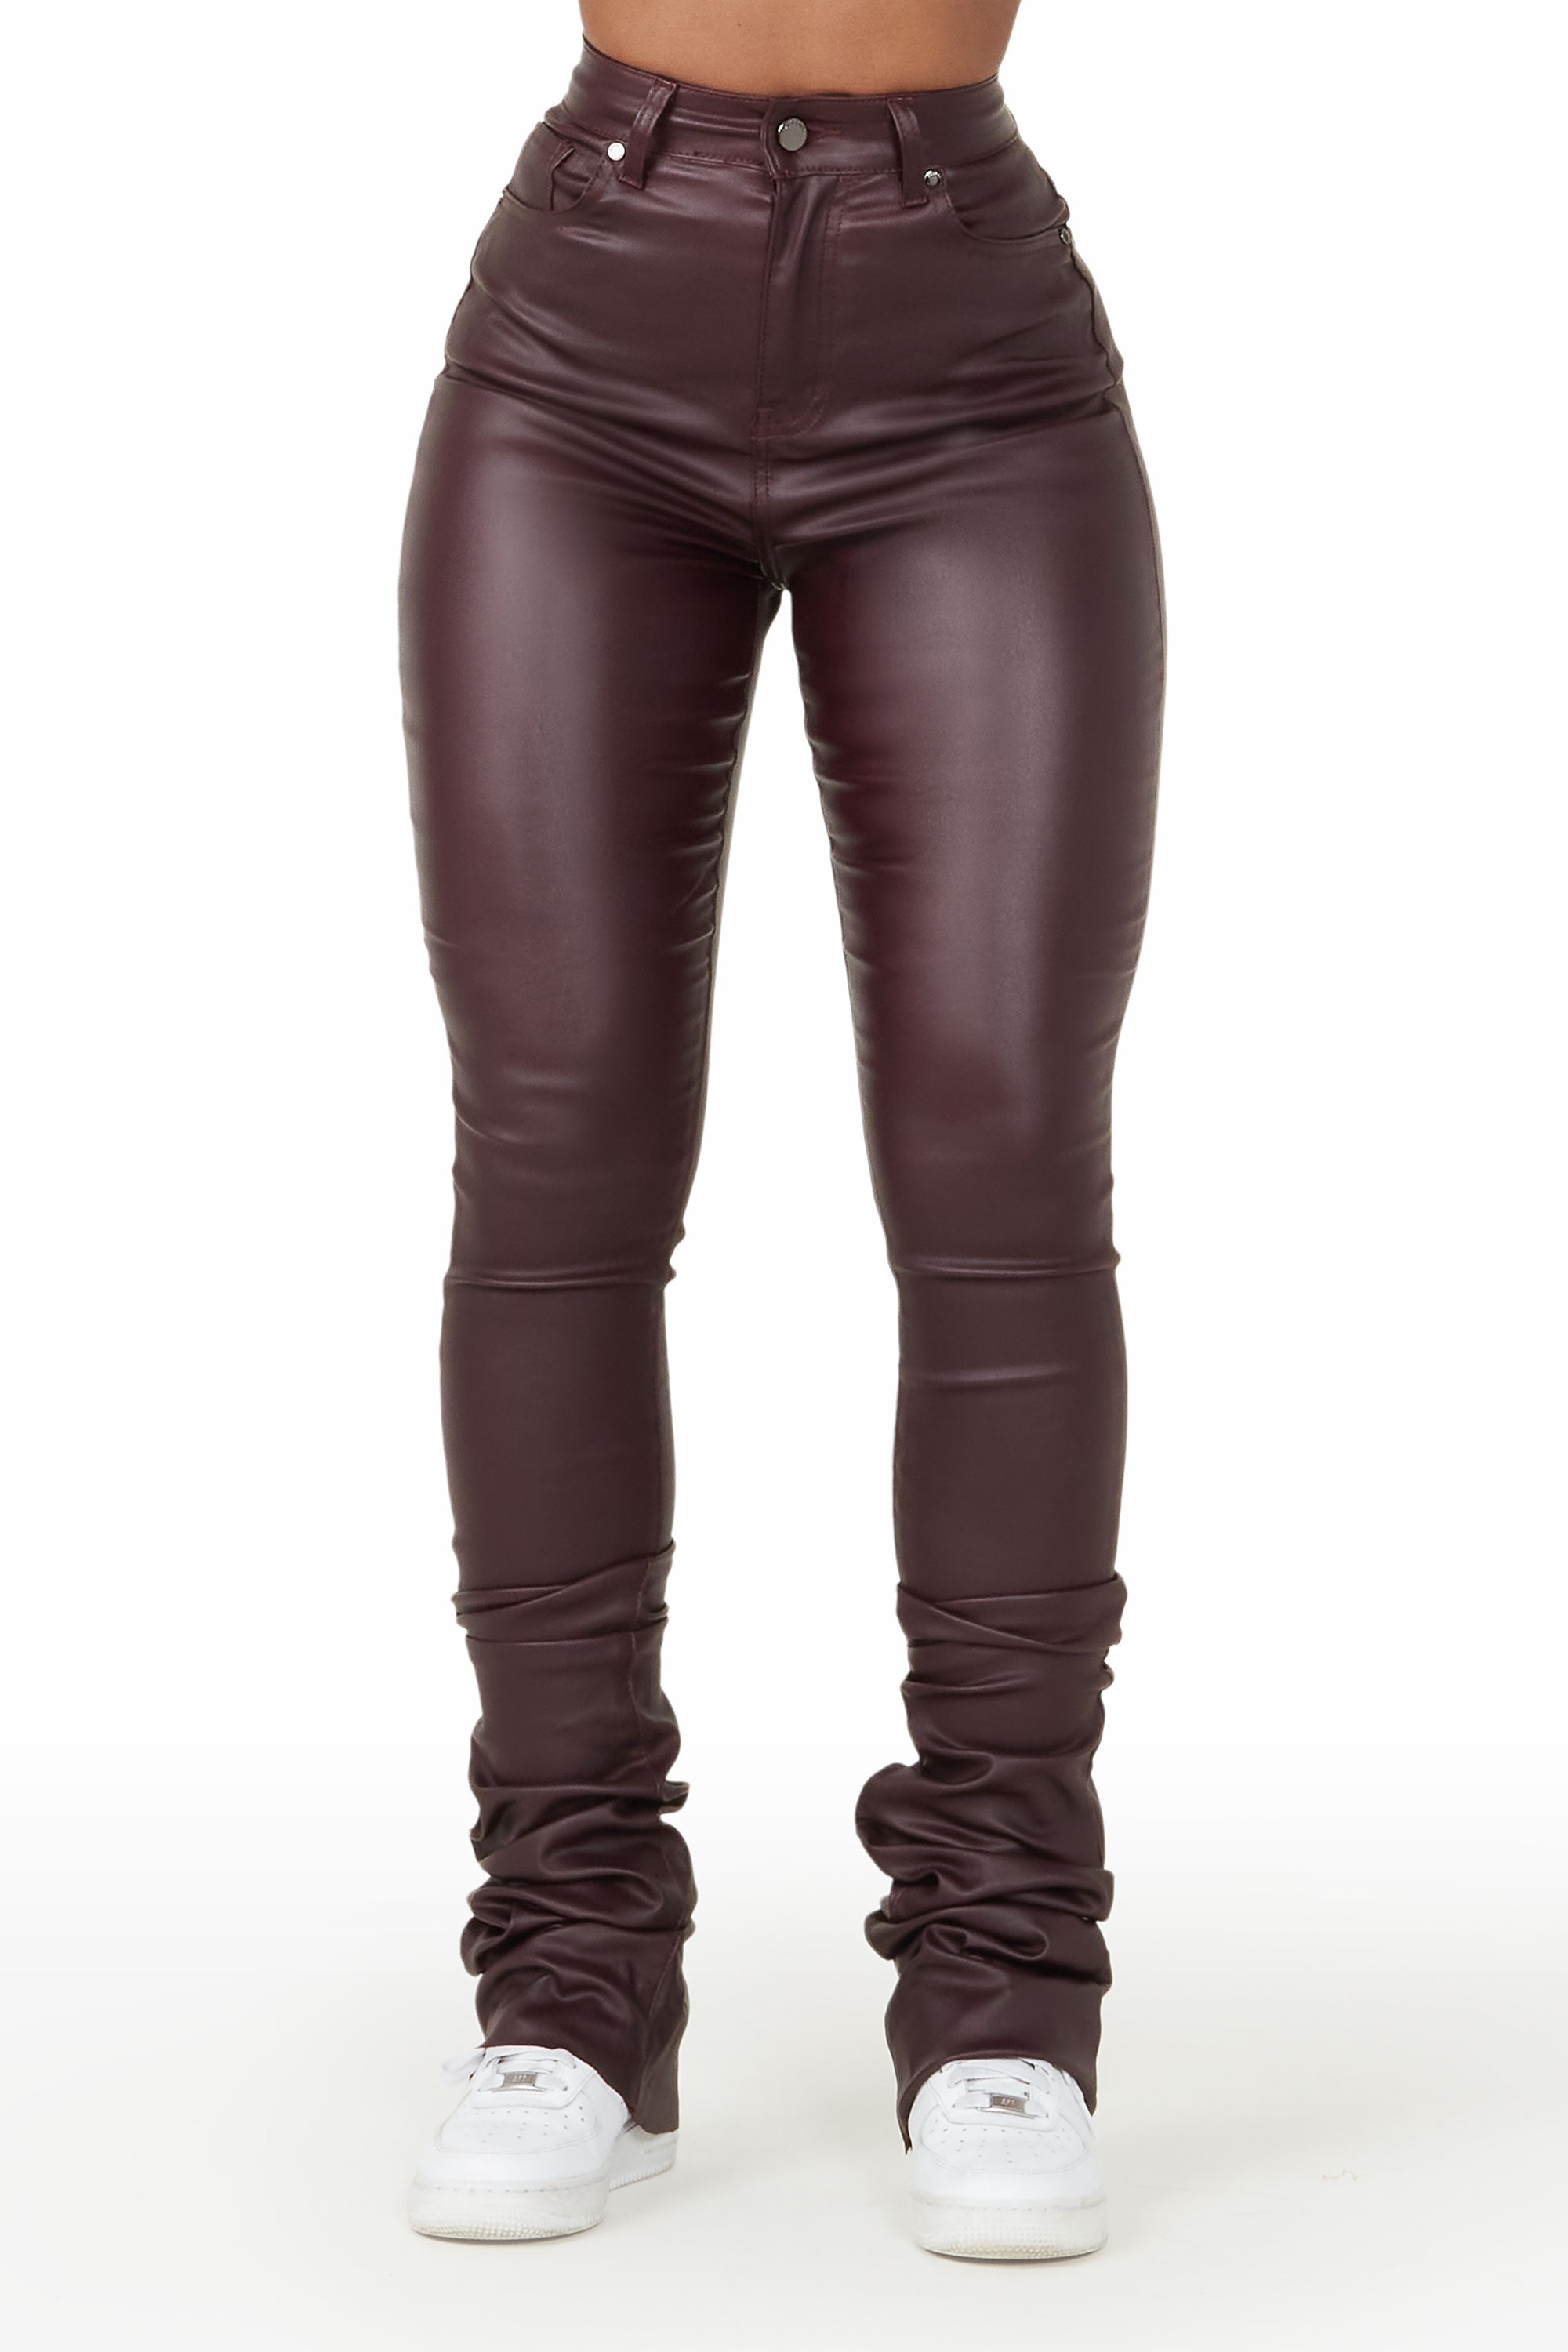 Pay Attention Wine PU Super Stacked Flare Pant